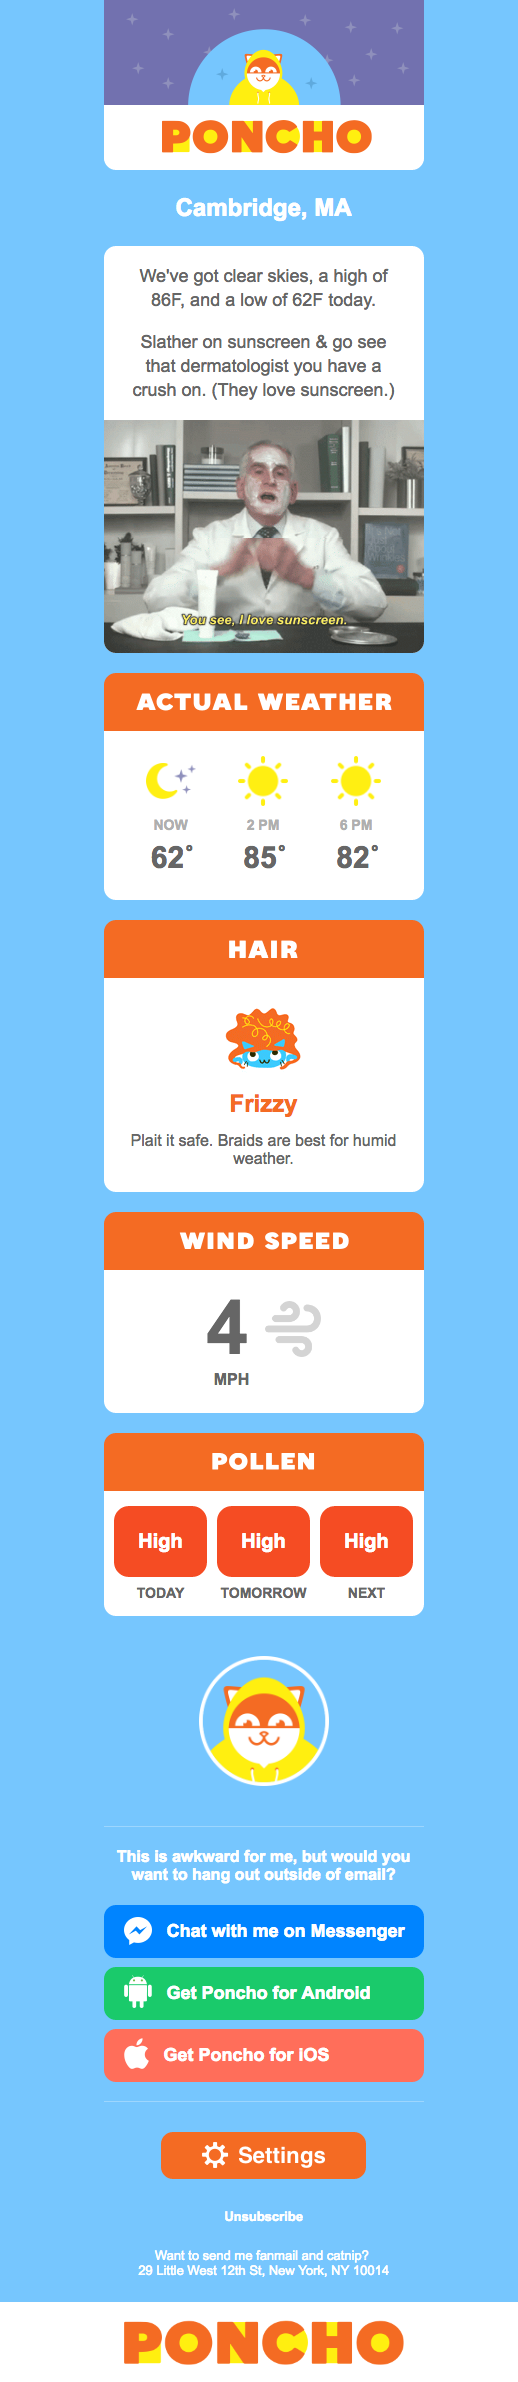 Email marketing campaign example by Poncho showing a custom weather forecast